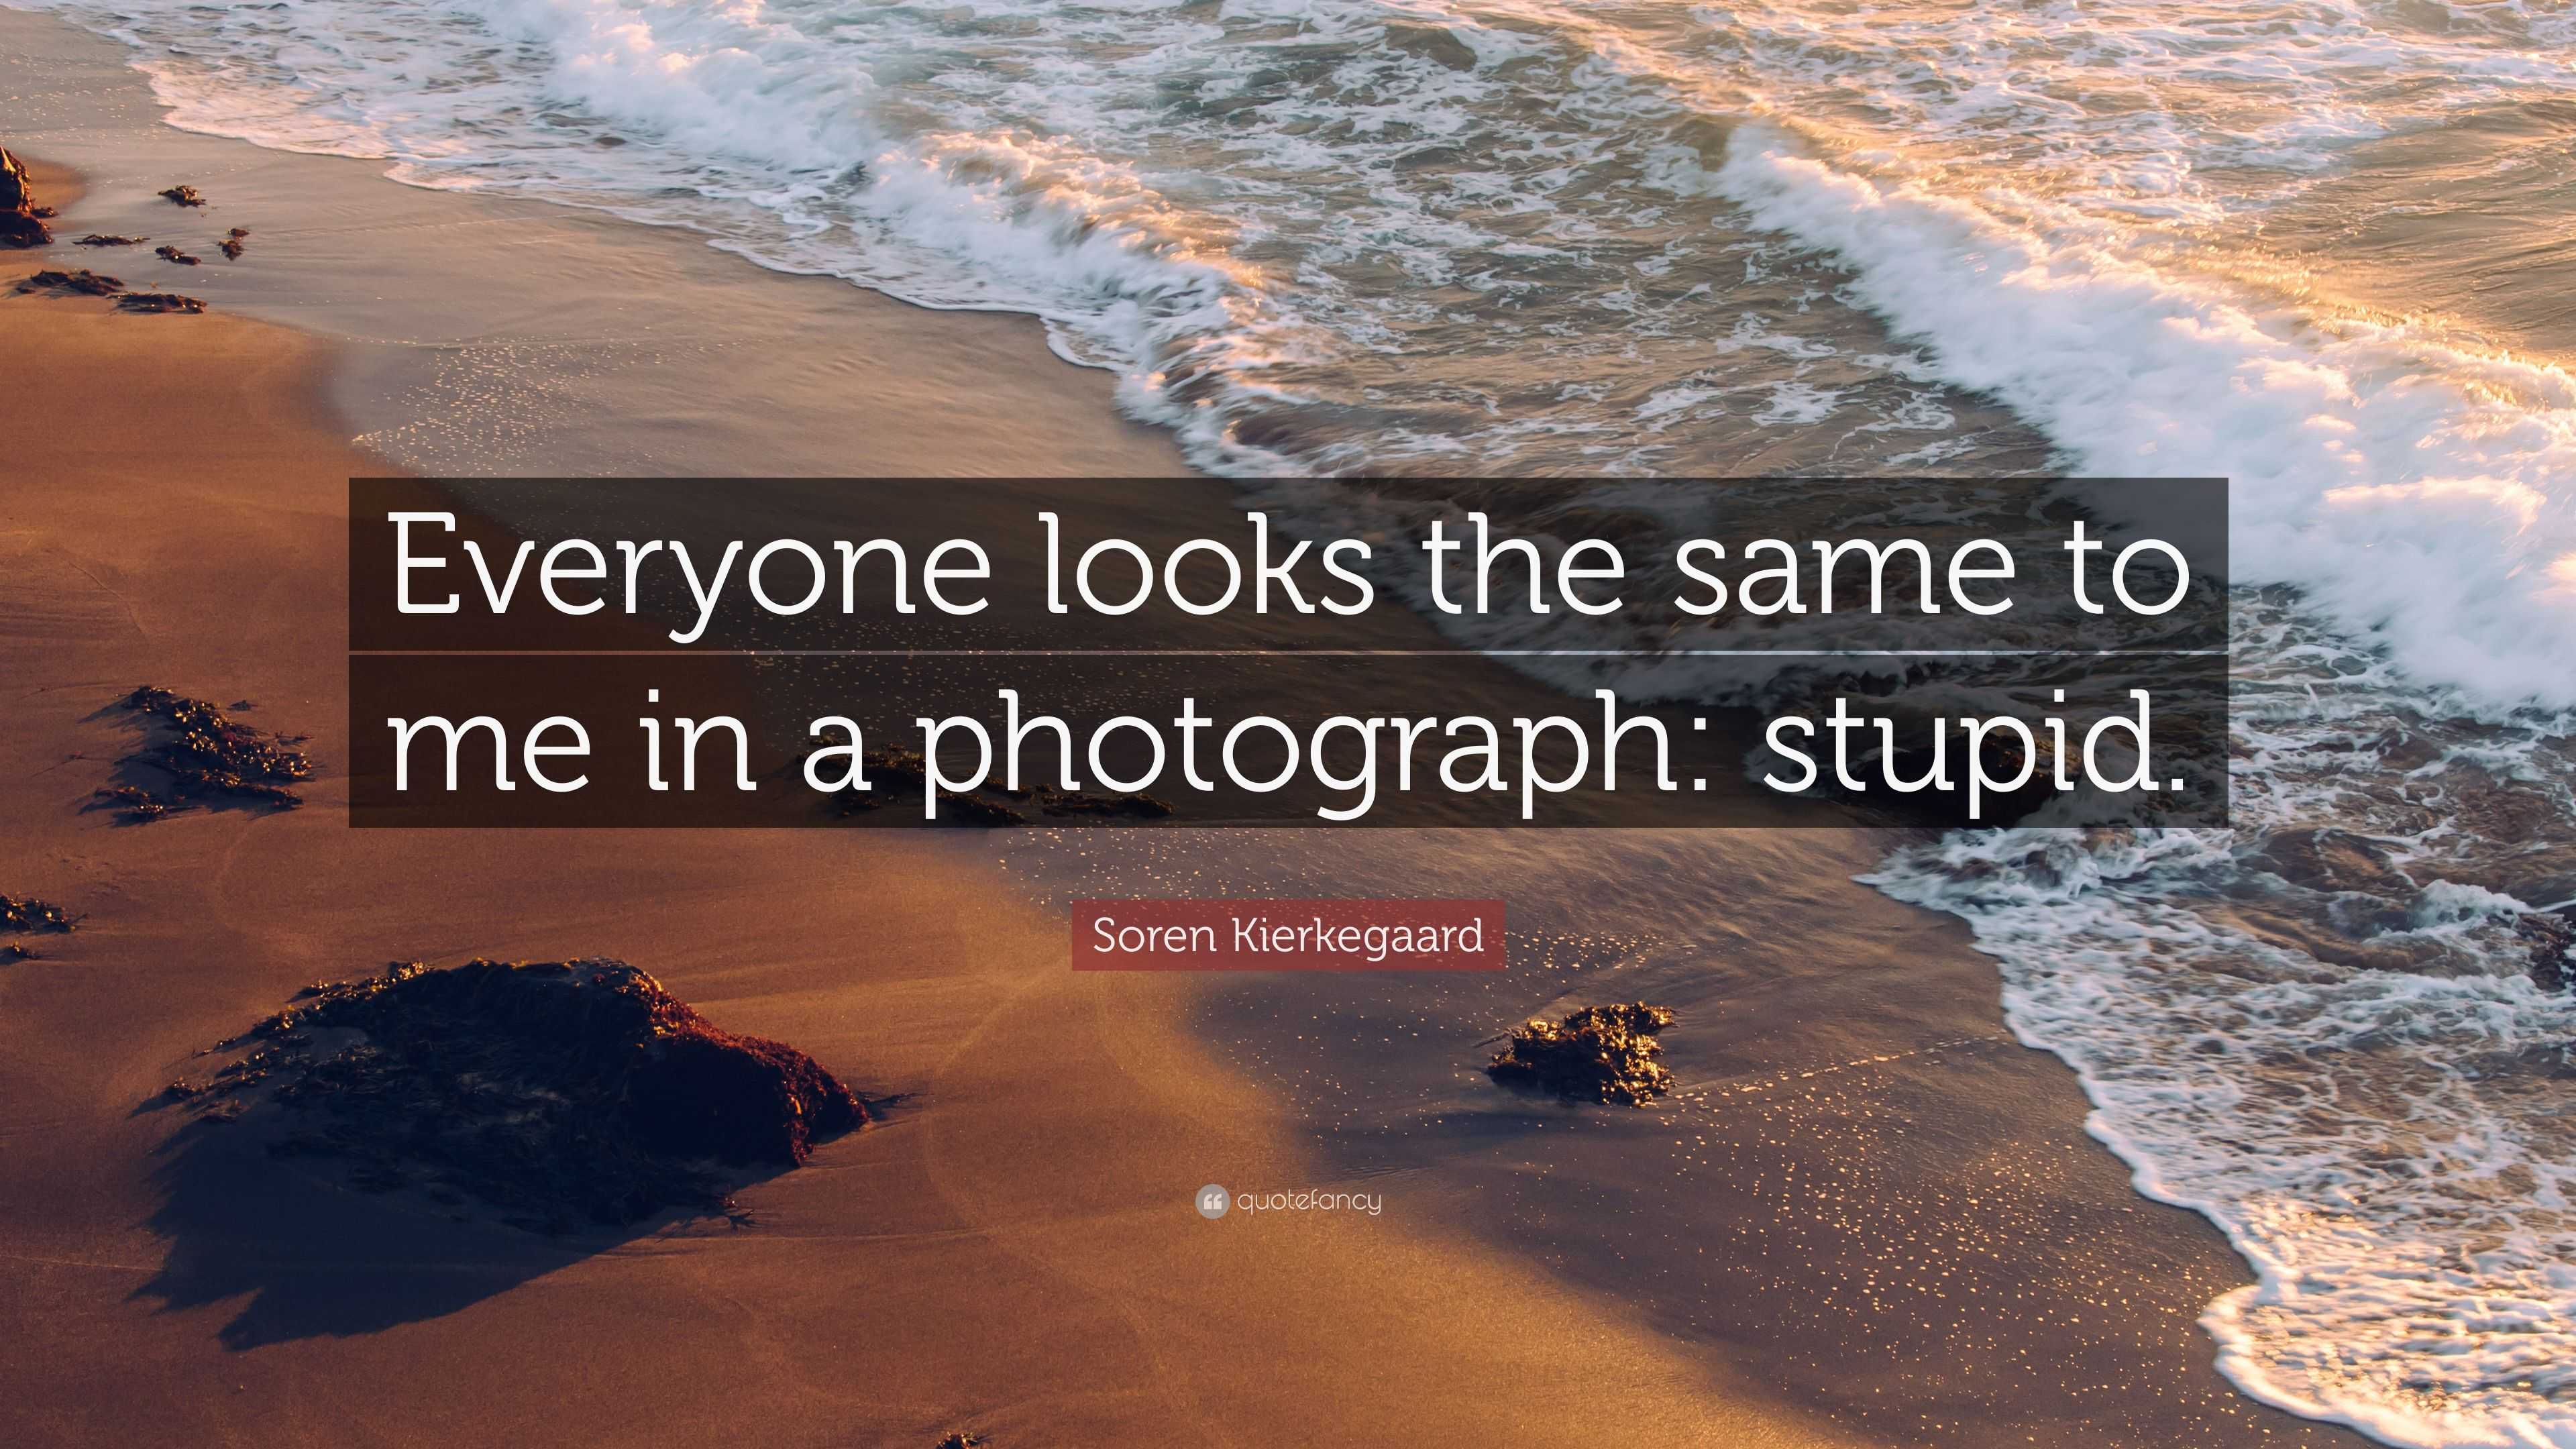 Soren Kierkegaard Quote: “Everyone looks the same to me in a photograph ...